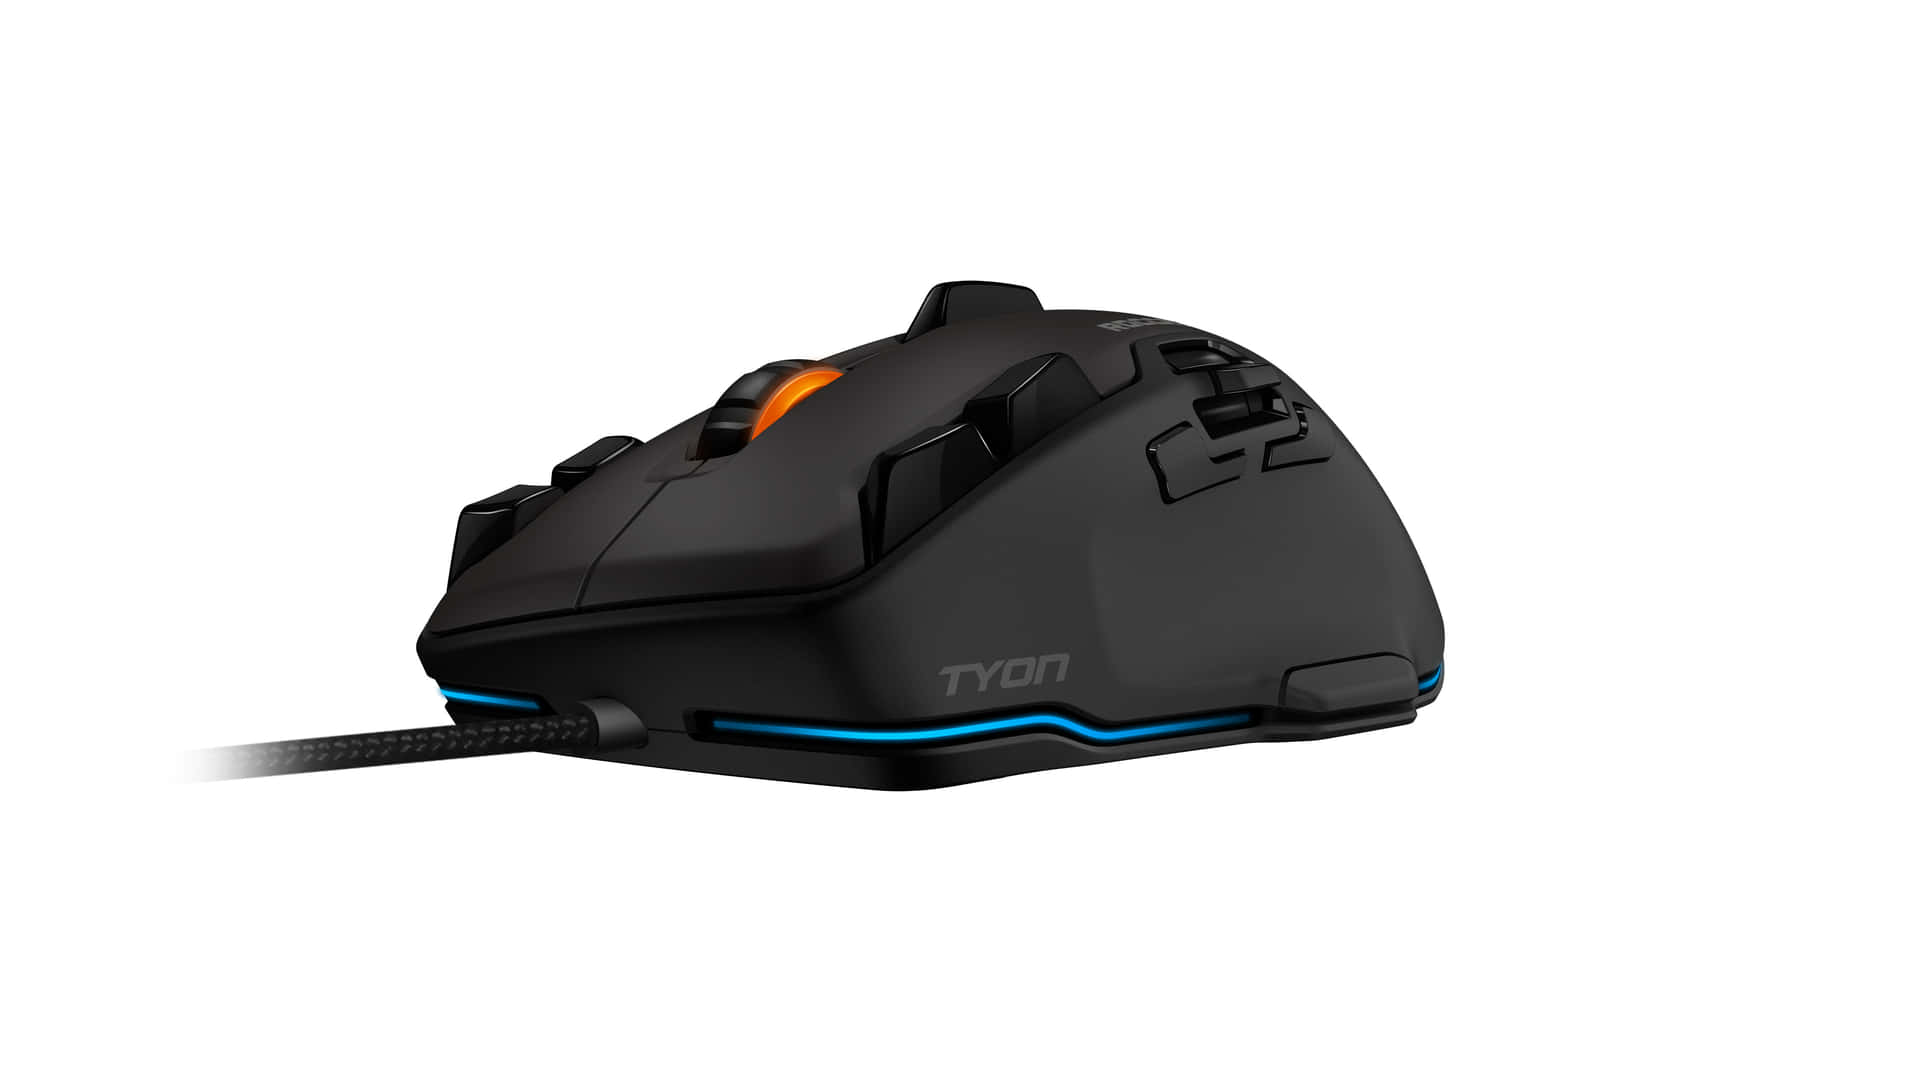 Sleek Gaming Mouse Illuminated in RGB Colors Wallpaper